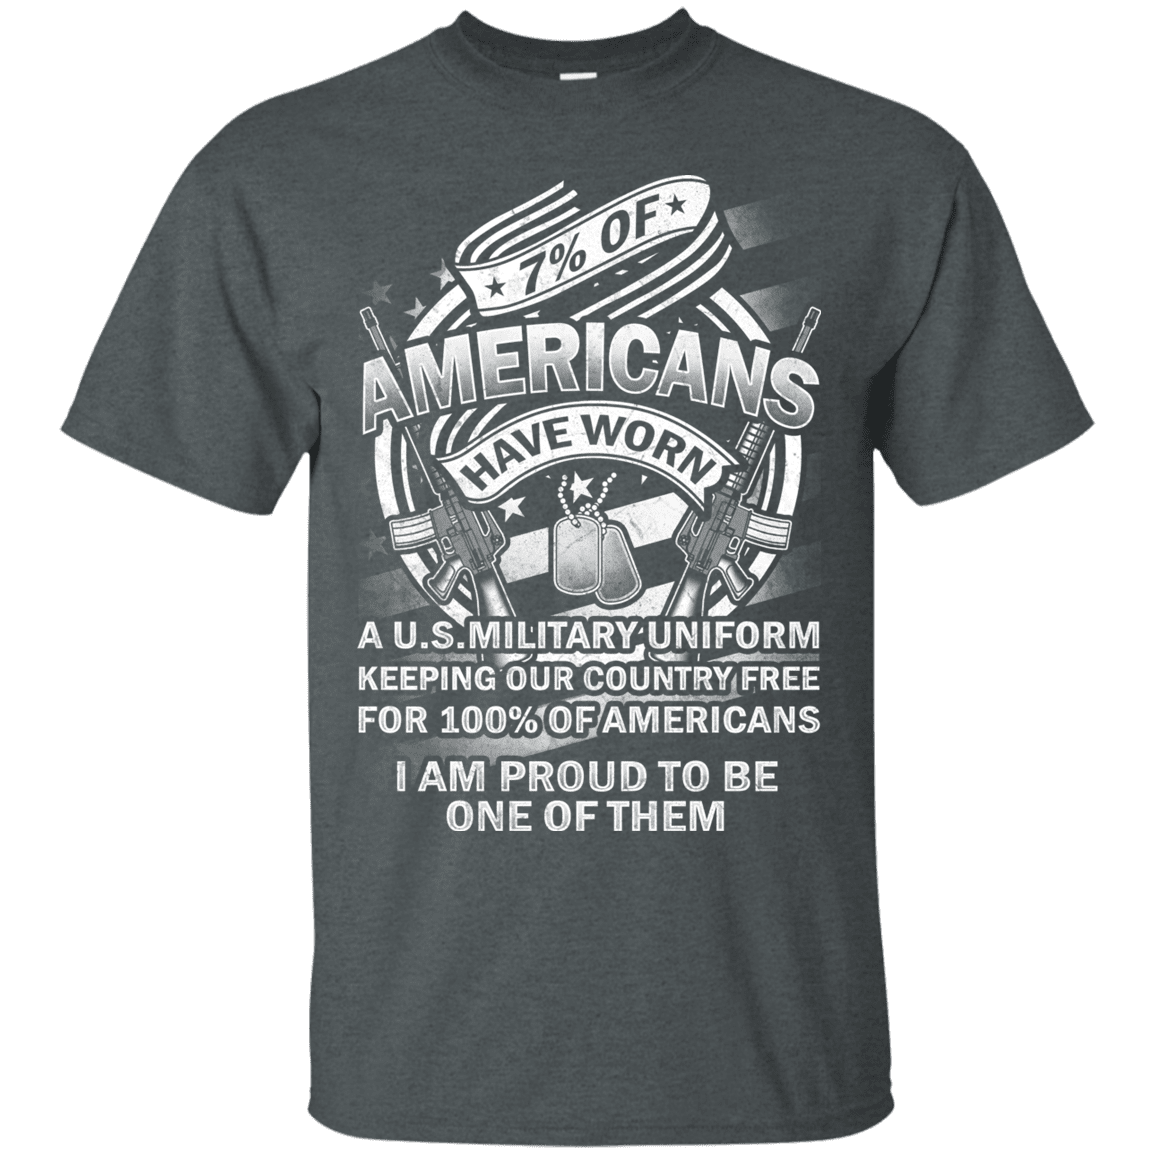 Military T-Shirt "7% of Americans Have Worn Proud To Be one of Them Men" Front-TShirt-General-Veterans Nation